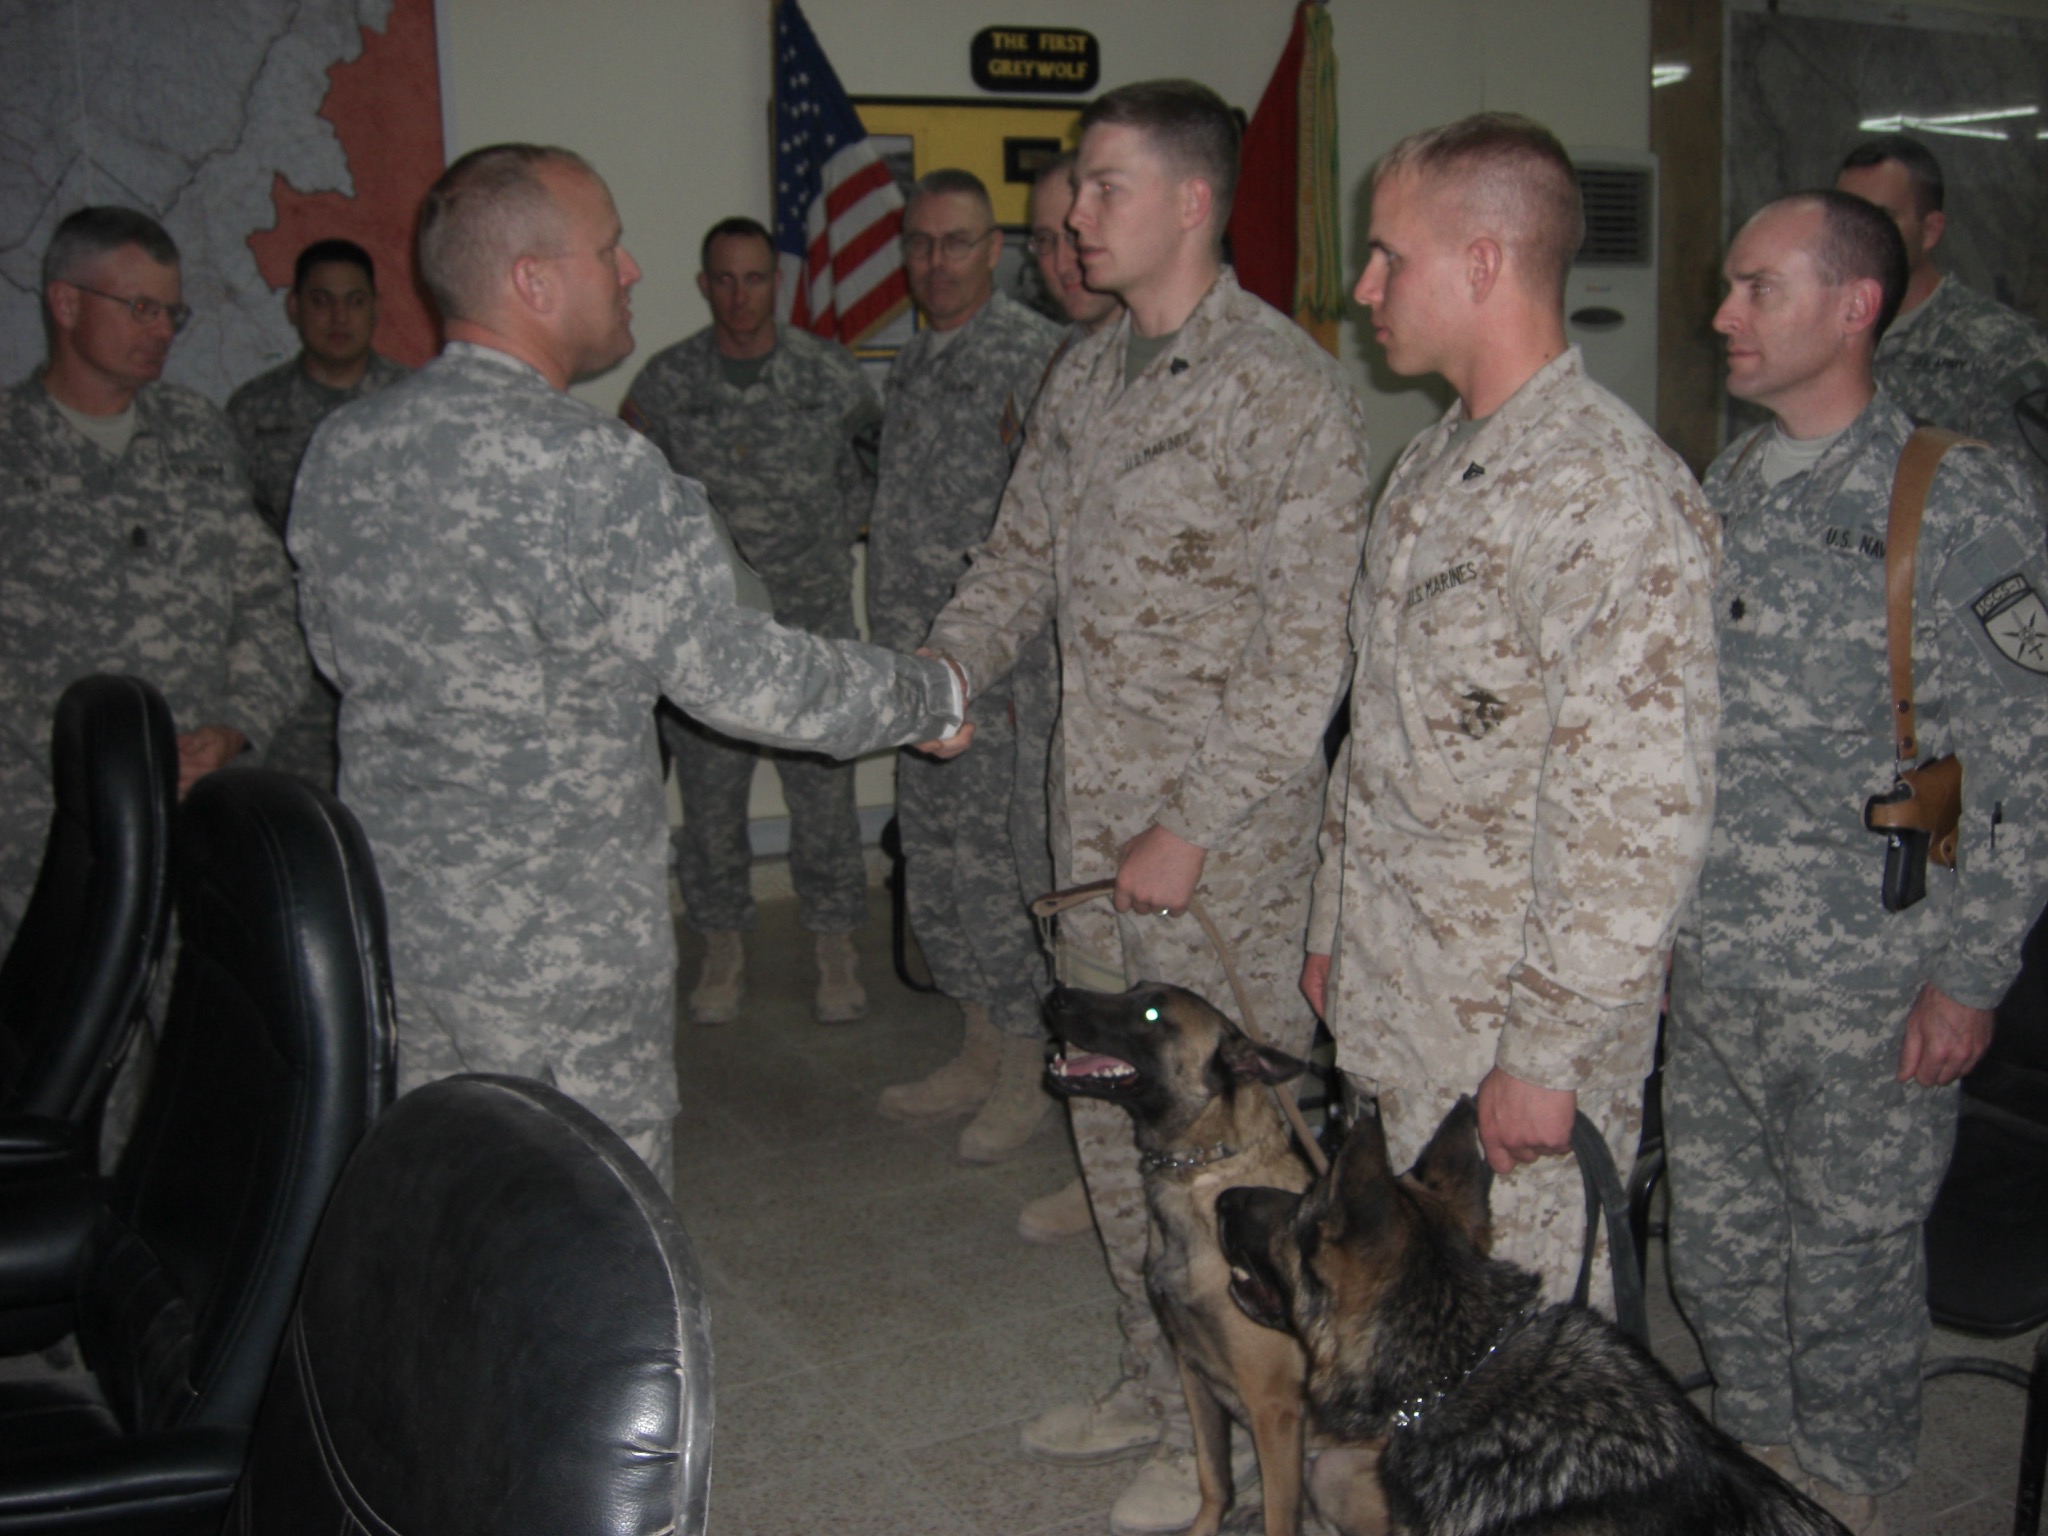 Baity (MWD Rona) and Kinney (MWD Hans) in Baghdad Iraq being awarded Army Commendation Medals for service to the US Army.